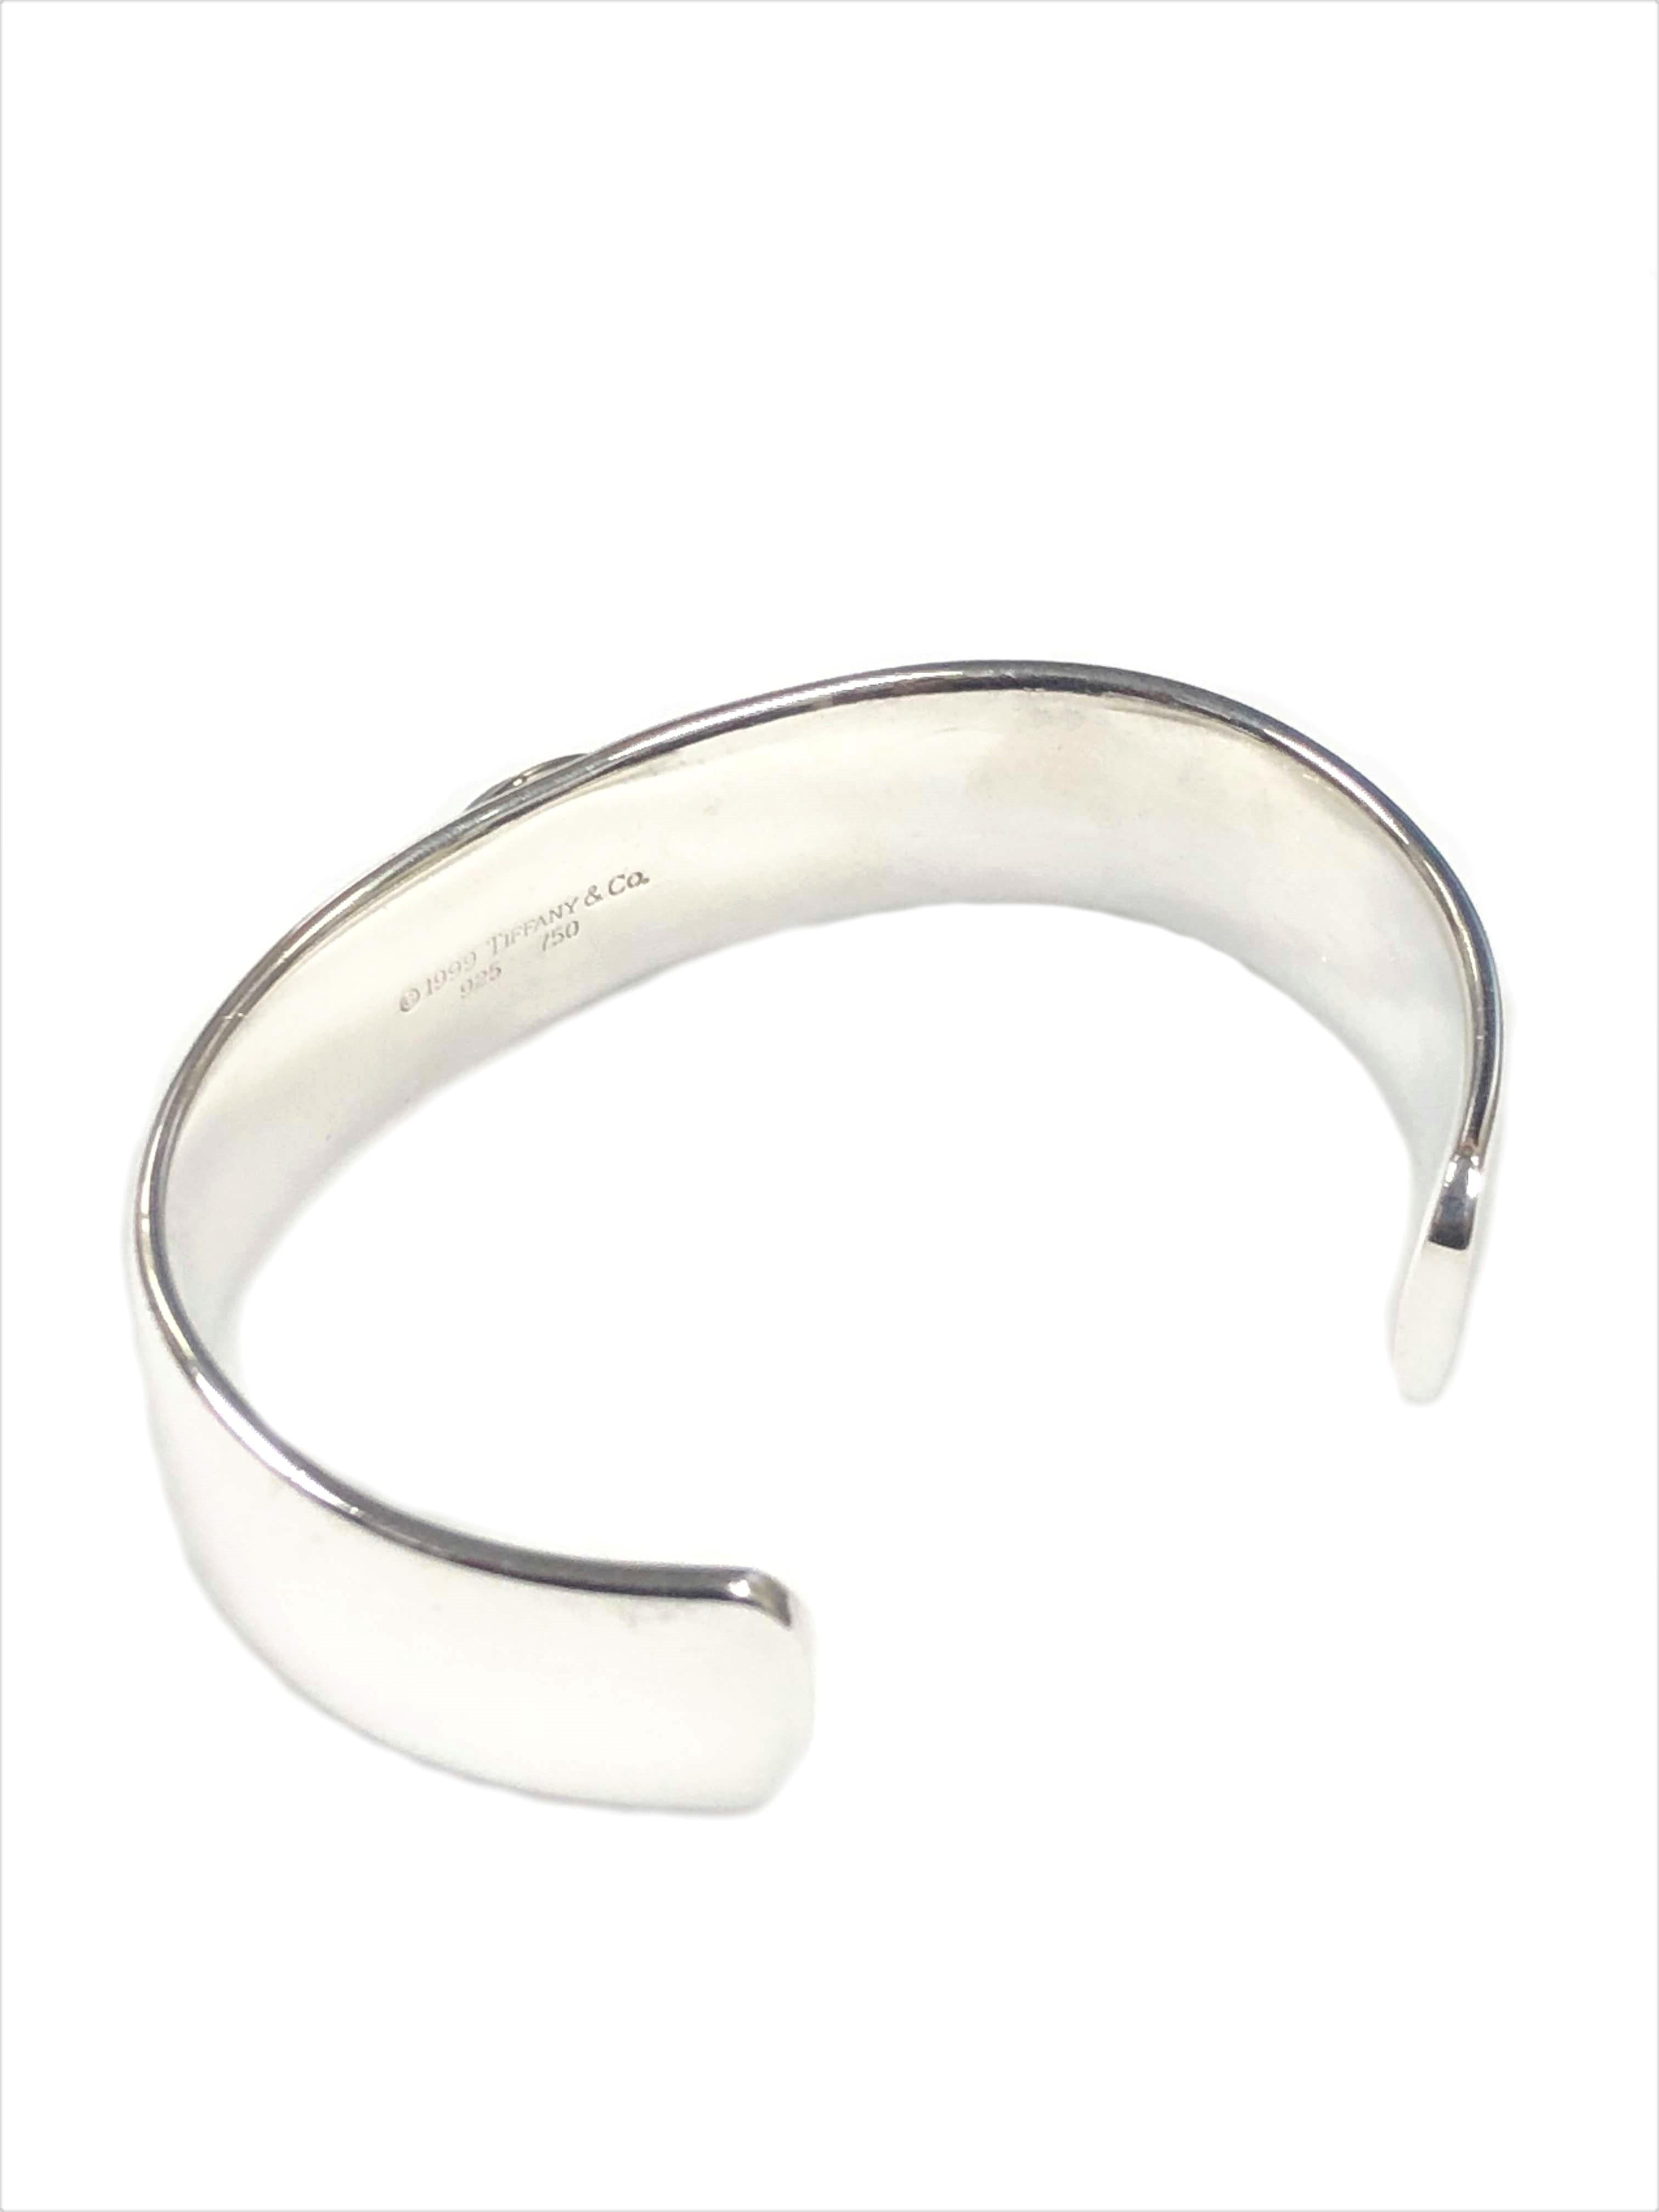 Circa 1999 Tiffany & Company Sterling Silver Cuff Bracelet, formed from very thick gauge Silver, measuring 5/8 inch wide and 3 MM thick. Centrally set with a Hematite stone in an 18K Yellow Gold bezel. Wrist size 6 inches with a 1 1/4 inch opening